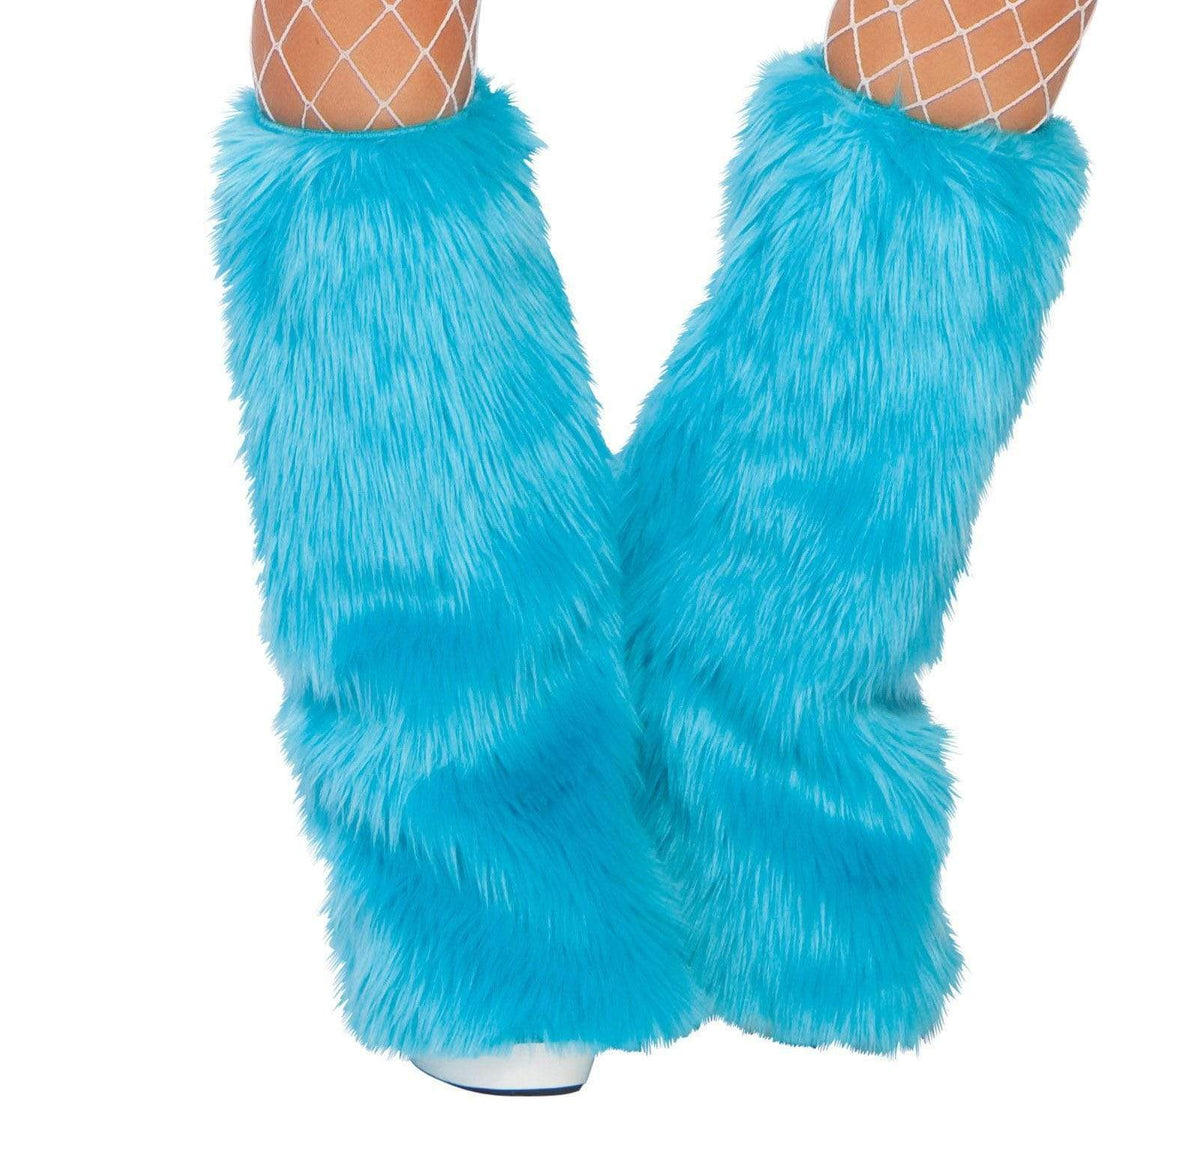 Roma OS / Blue Fur Leg Warmer SHC-C121-OS-TURQUOISE-R Apparel &amp; Accessories &gt; Costumes &amp; Accessories &gt; Costumes